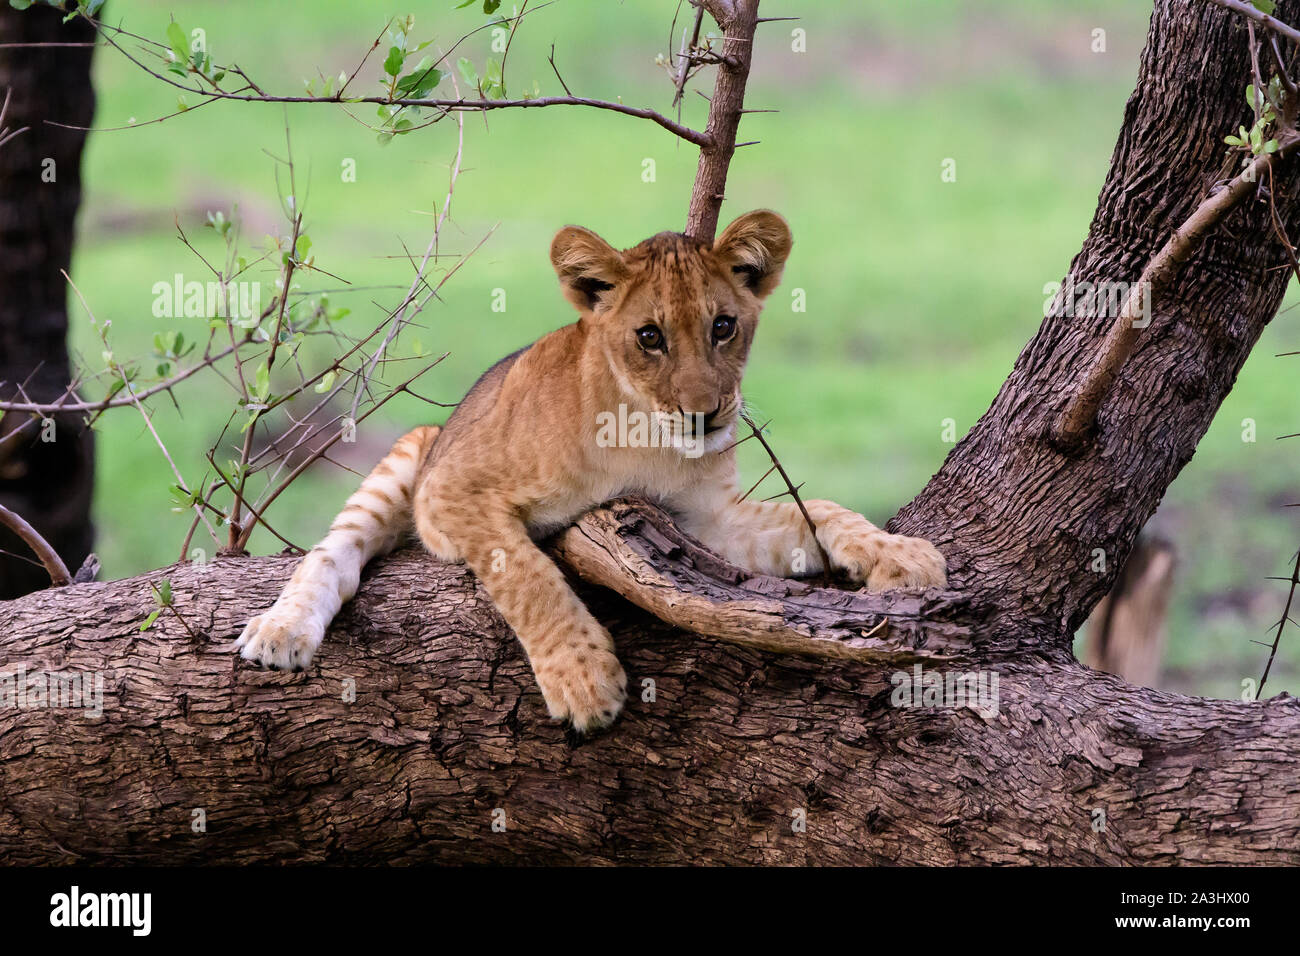 Lion cub on the branch of a fallen tree Stock Photo